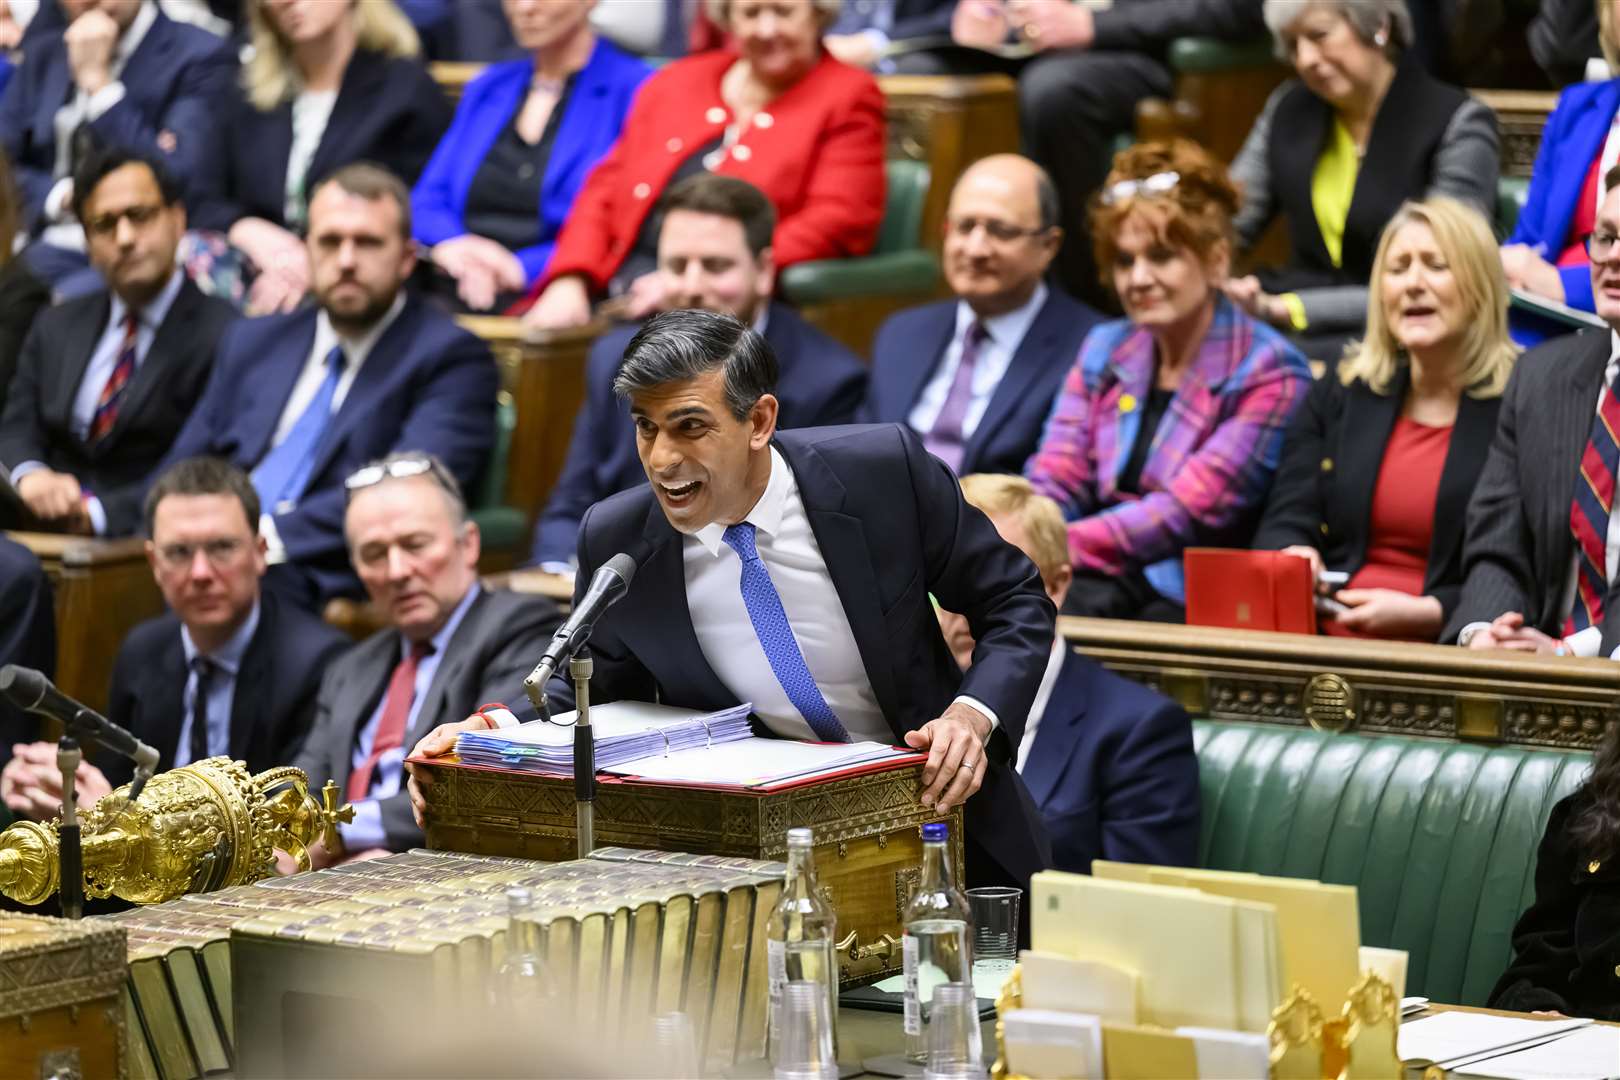 Prime Minister Rishi Sunak in the Commons chamber (Maria Unger/PA)